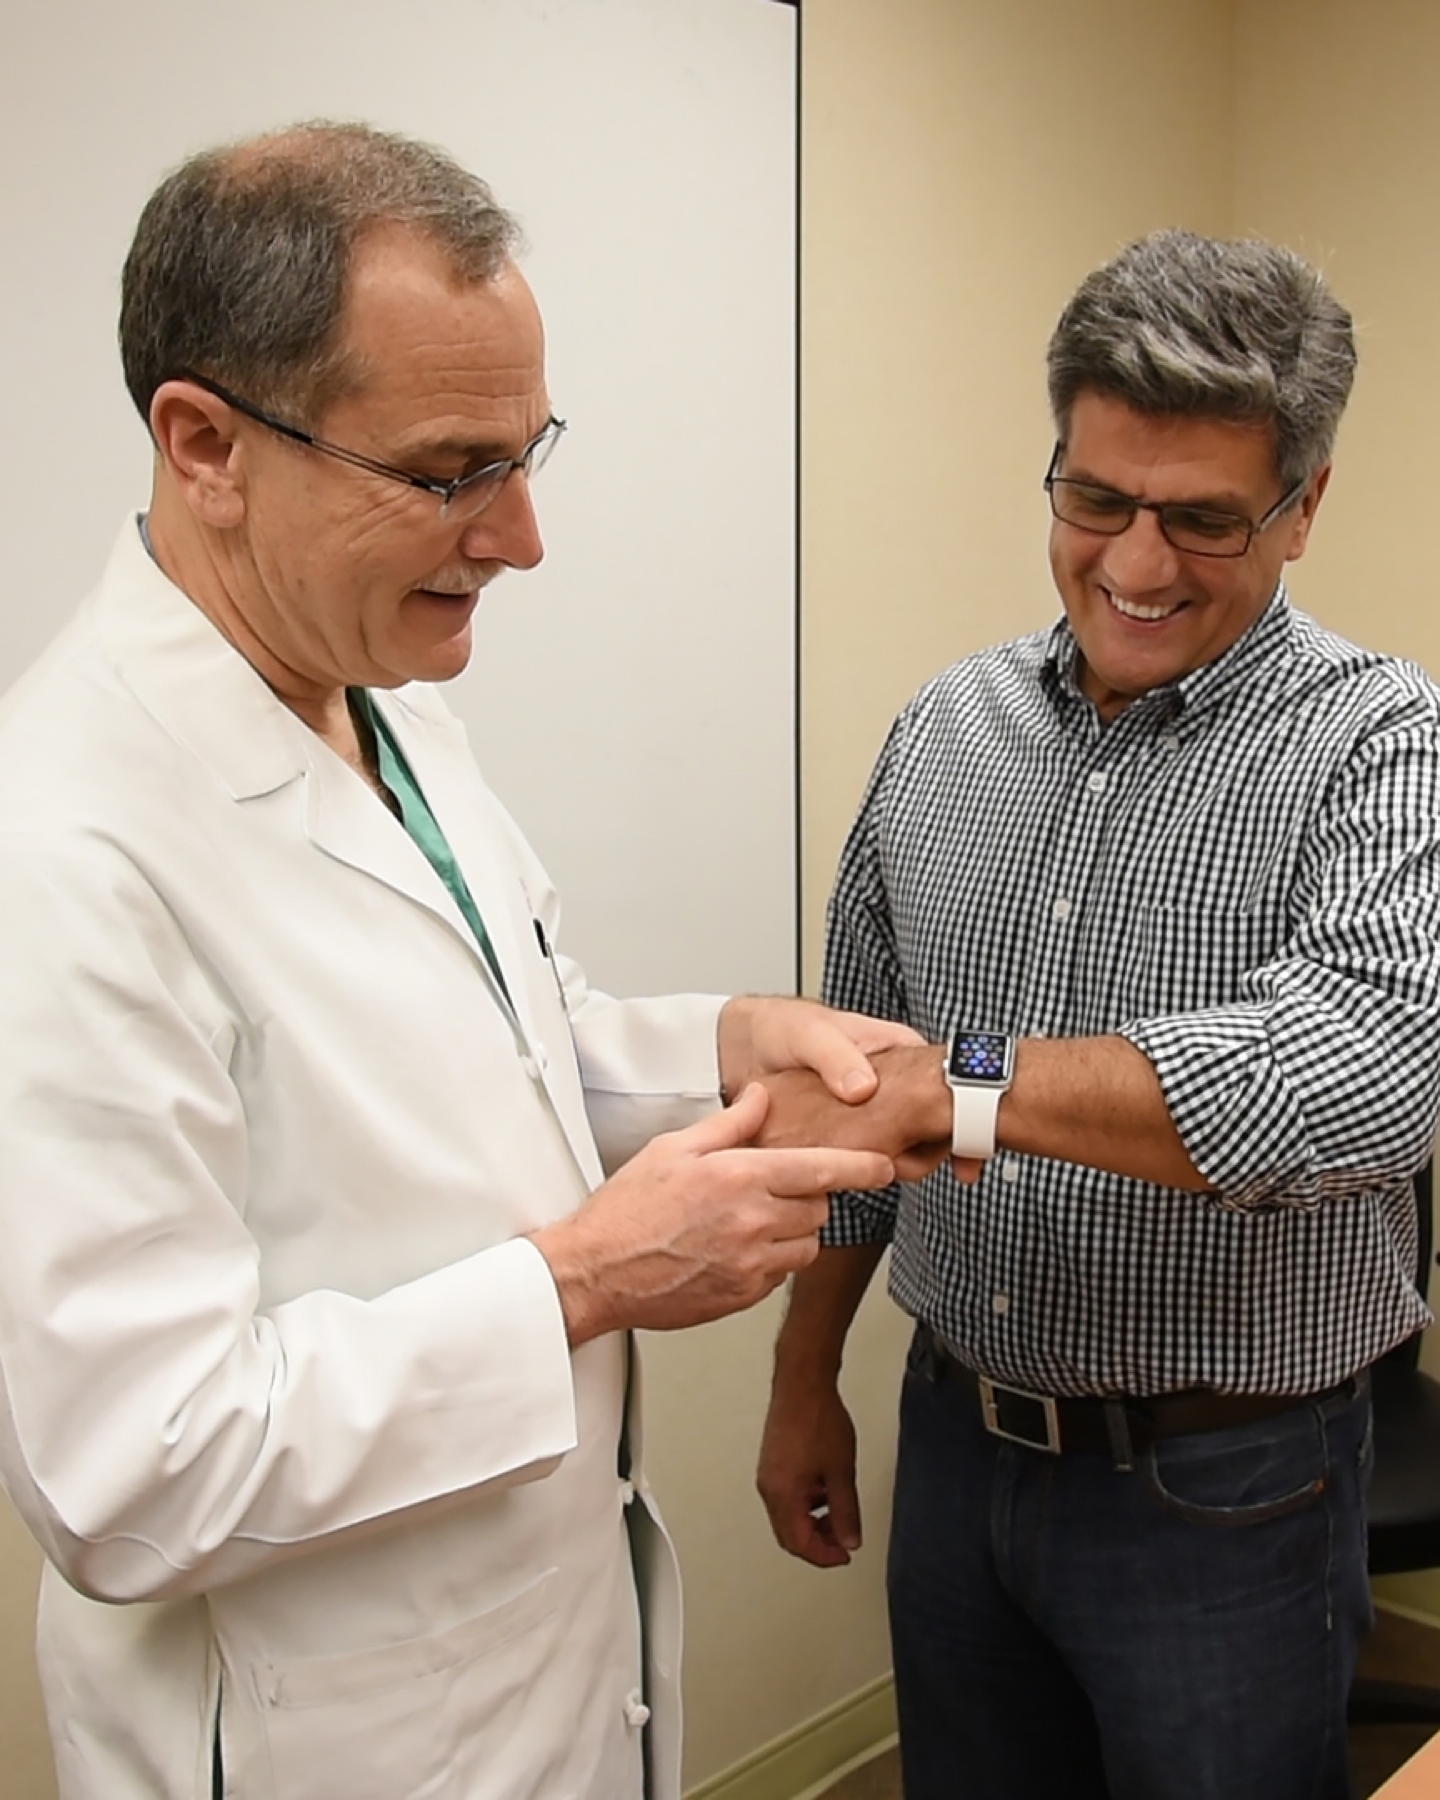 Dr. Richard Milani with patient using Apple Watch